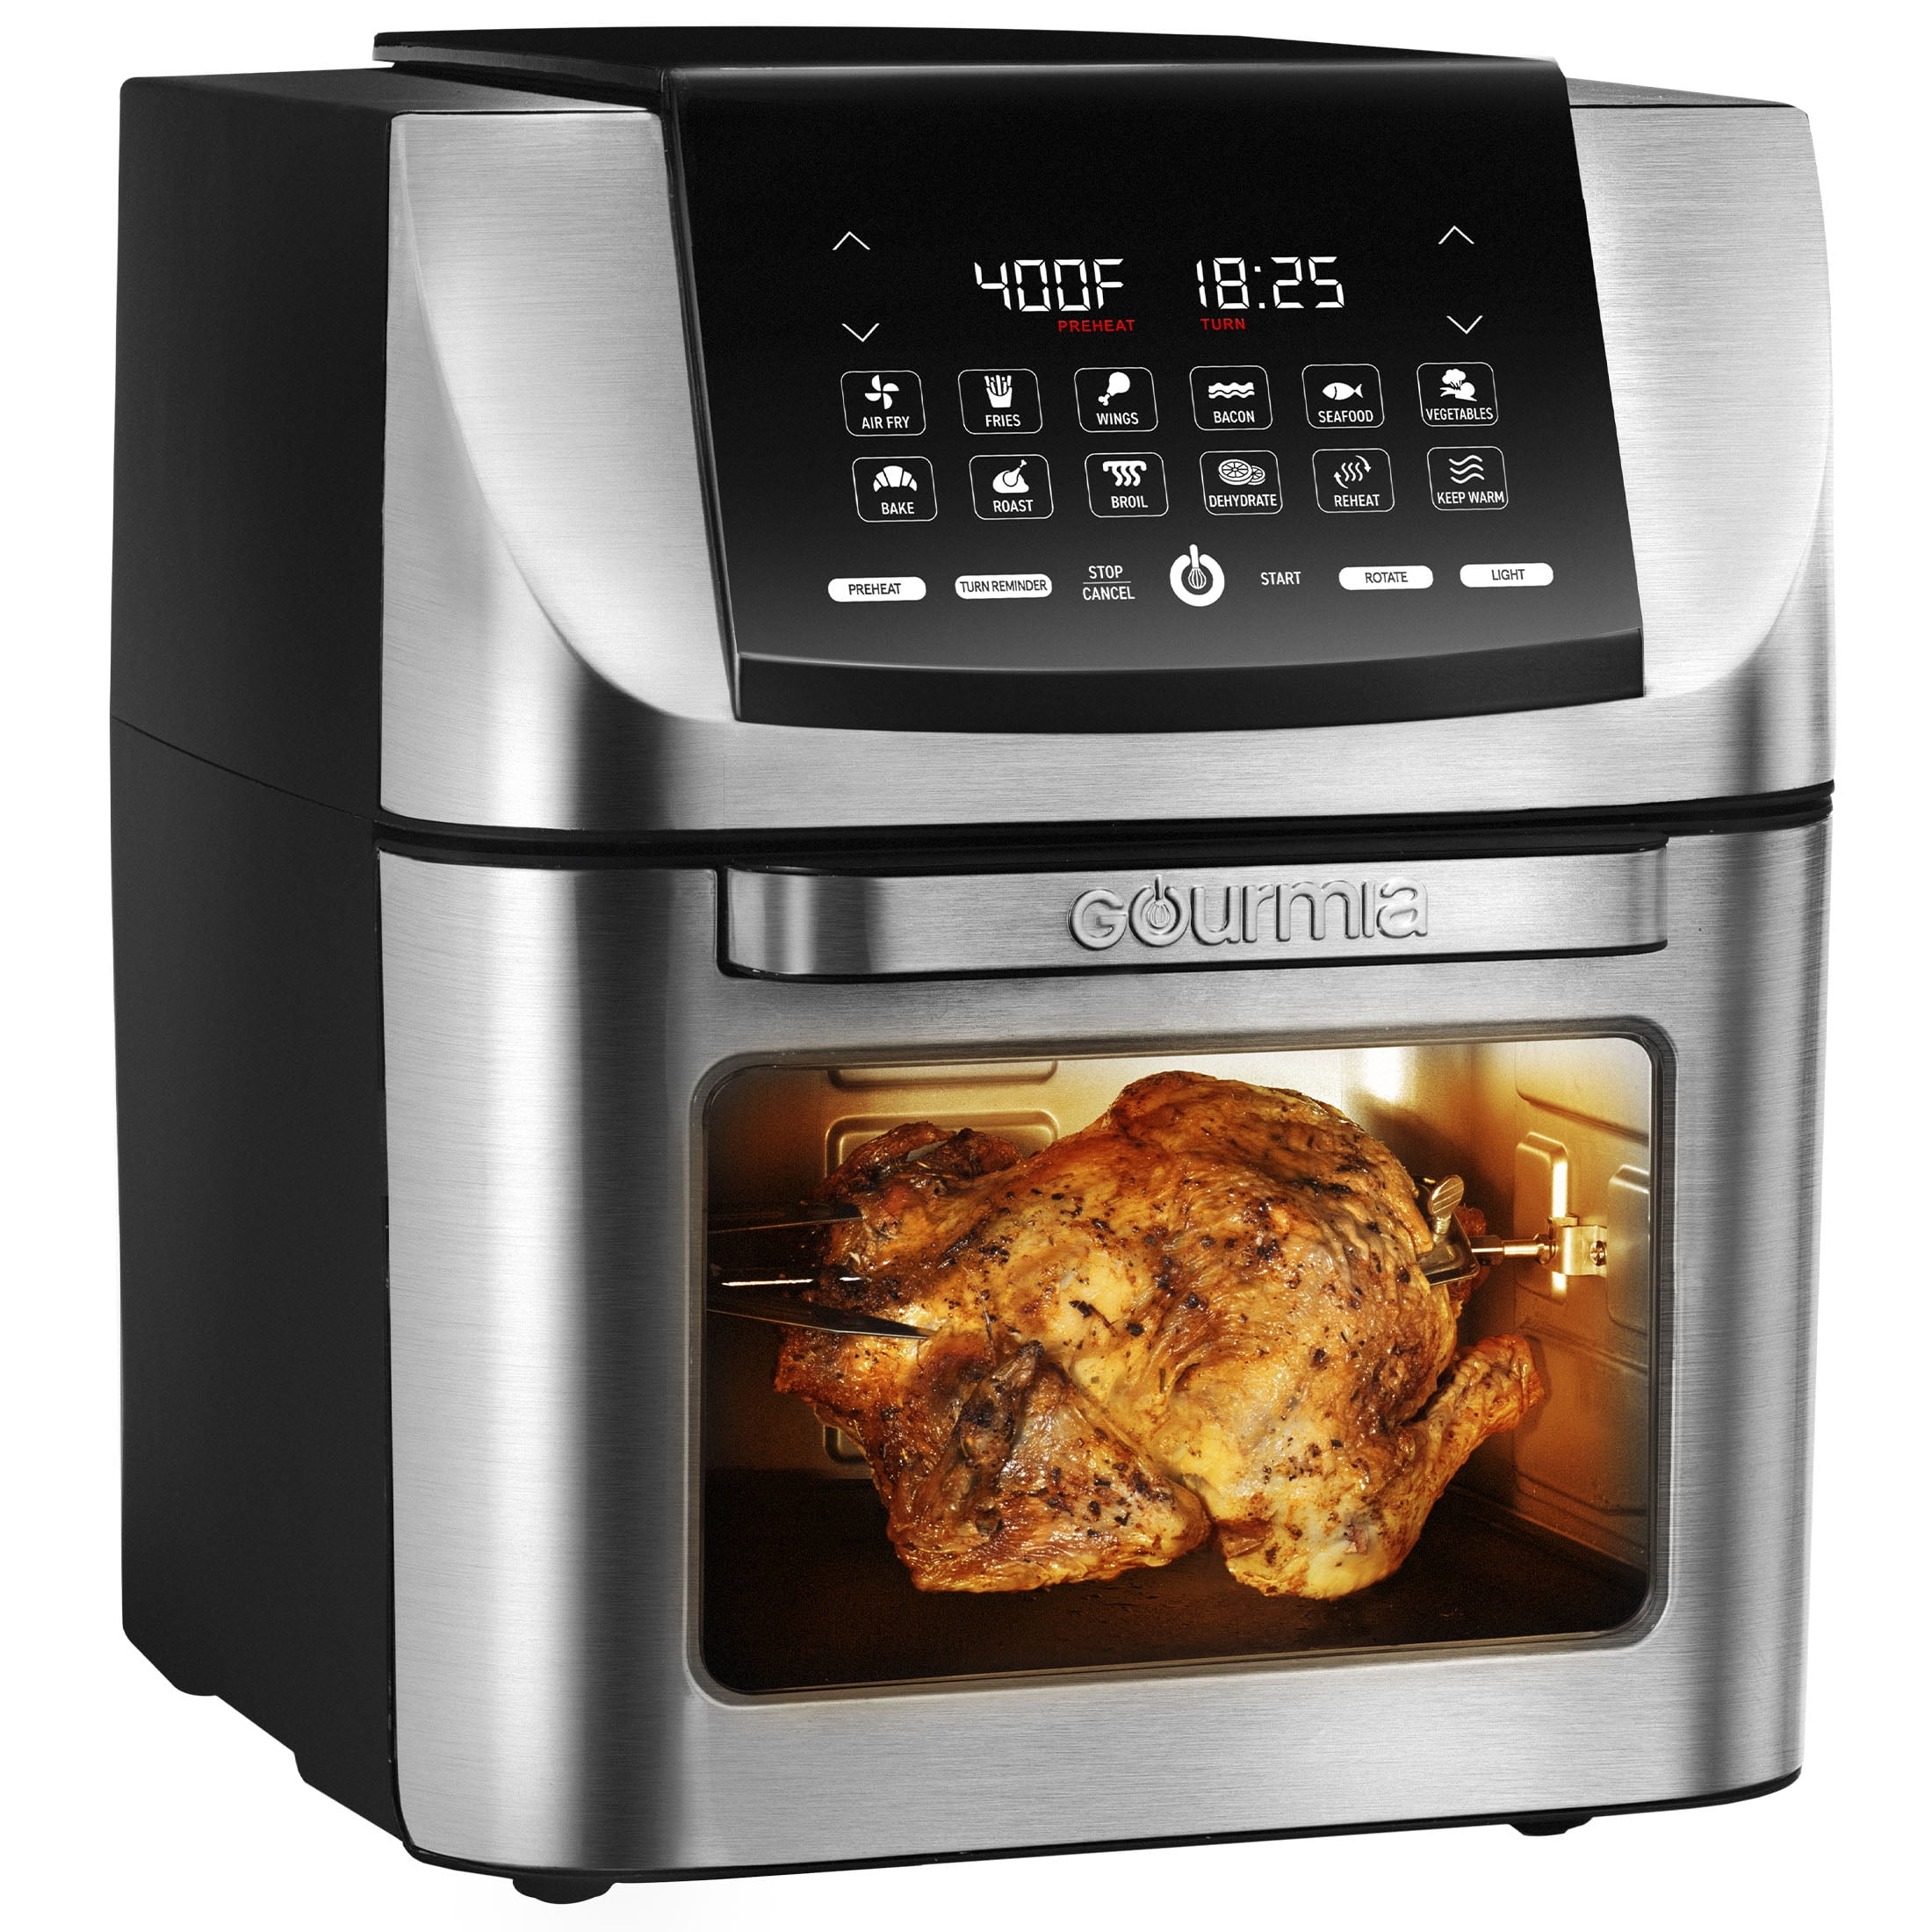 Gourmia GMF2600 9 In 1 Air Fryer, Vertical Rotisserie Oven